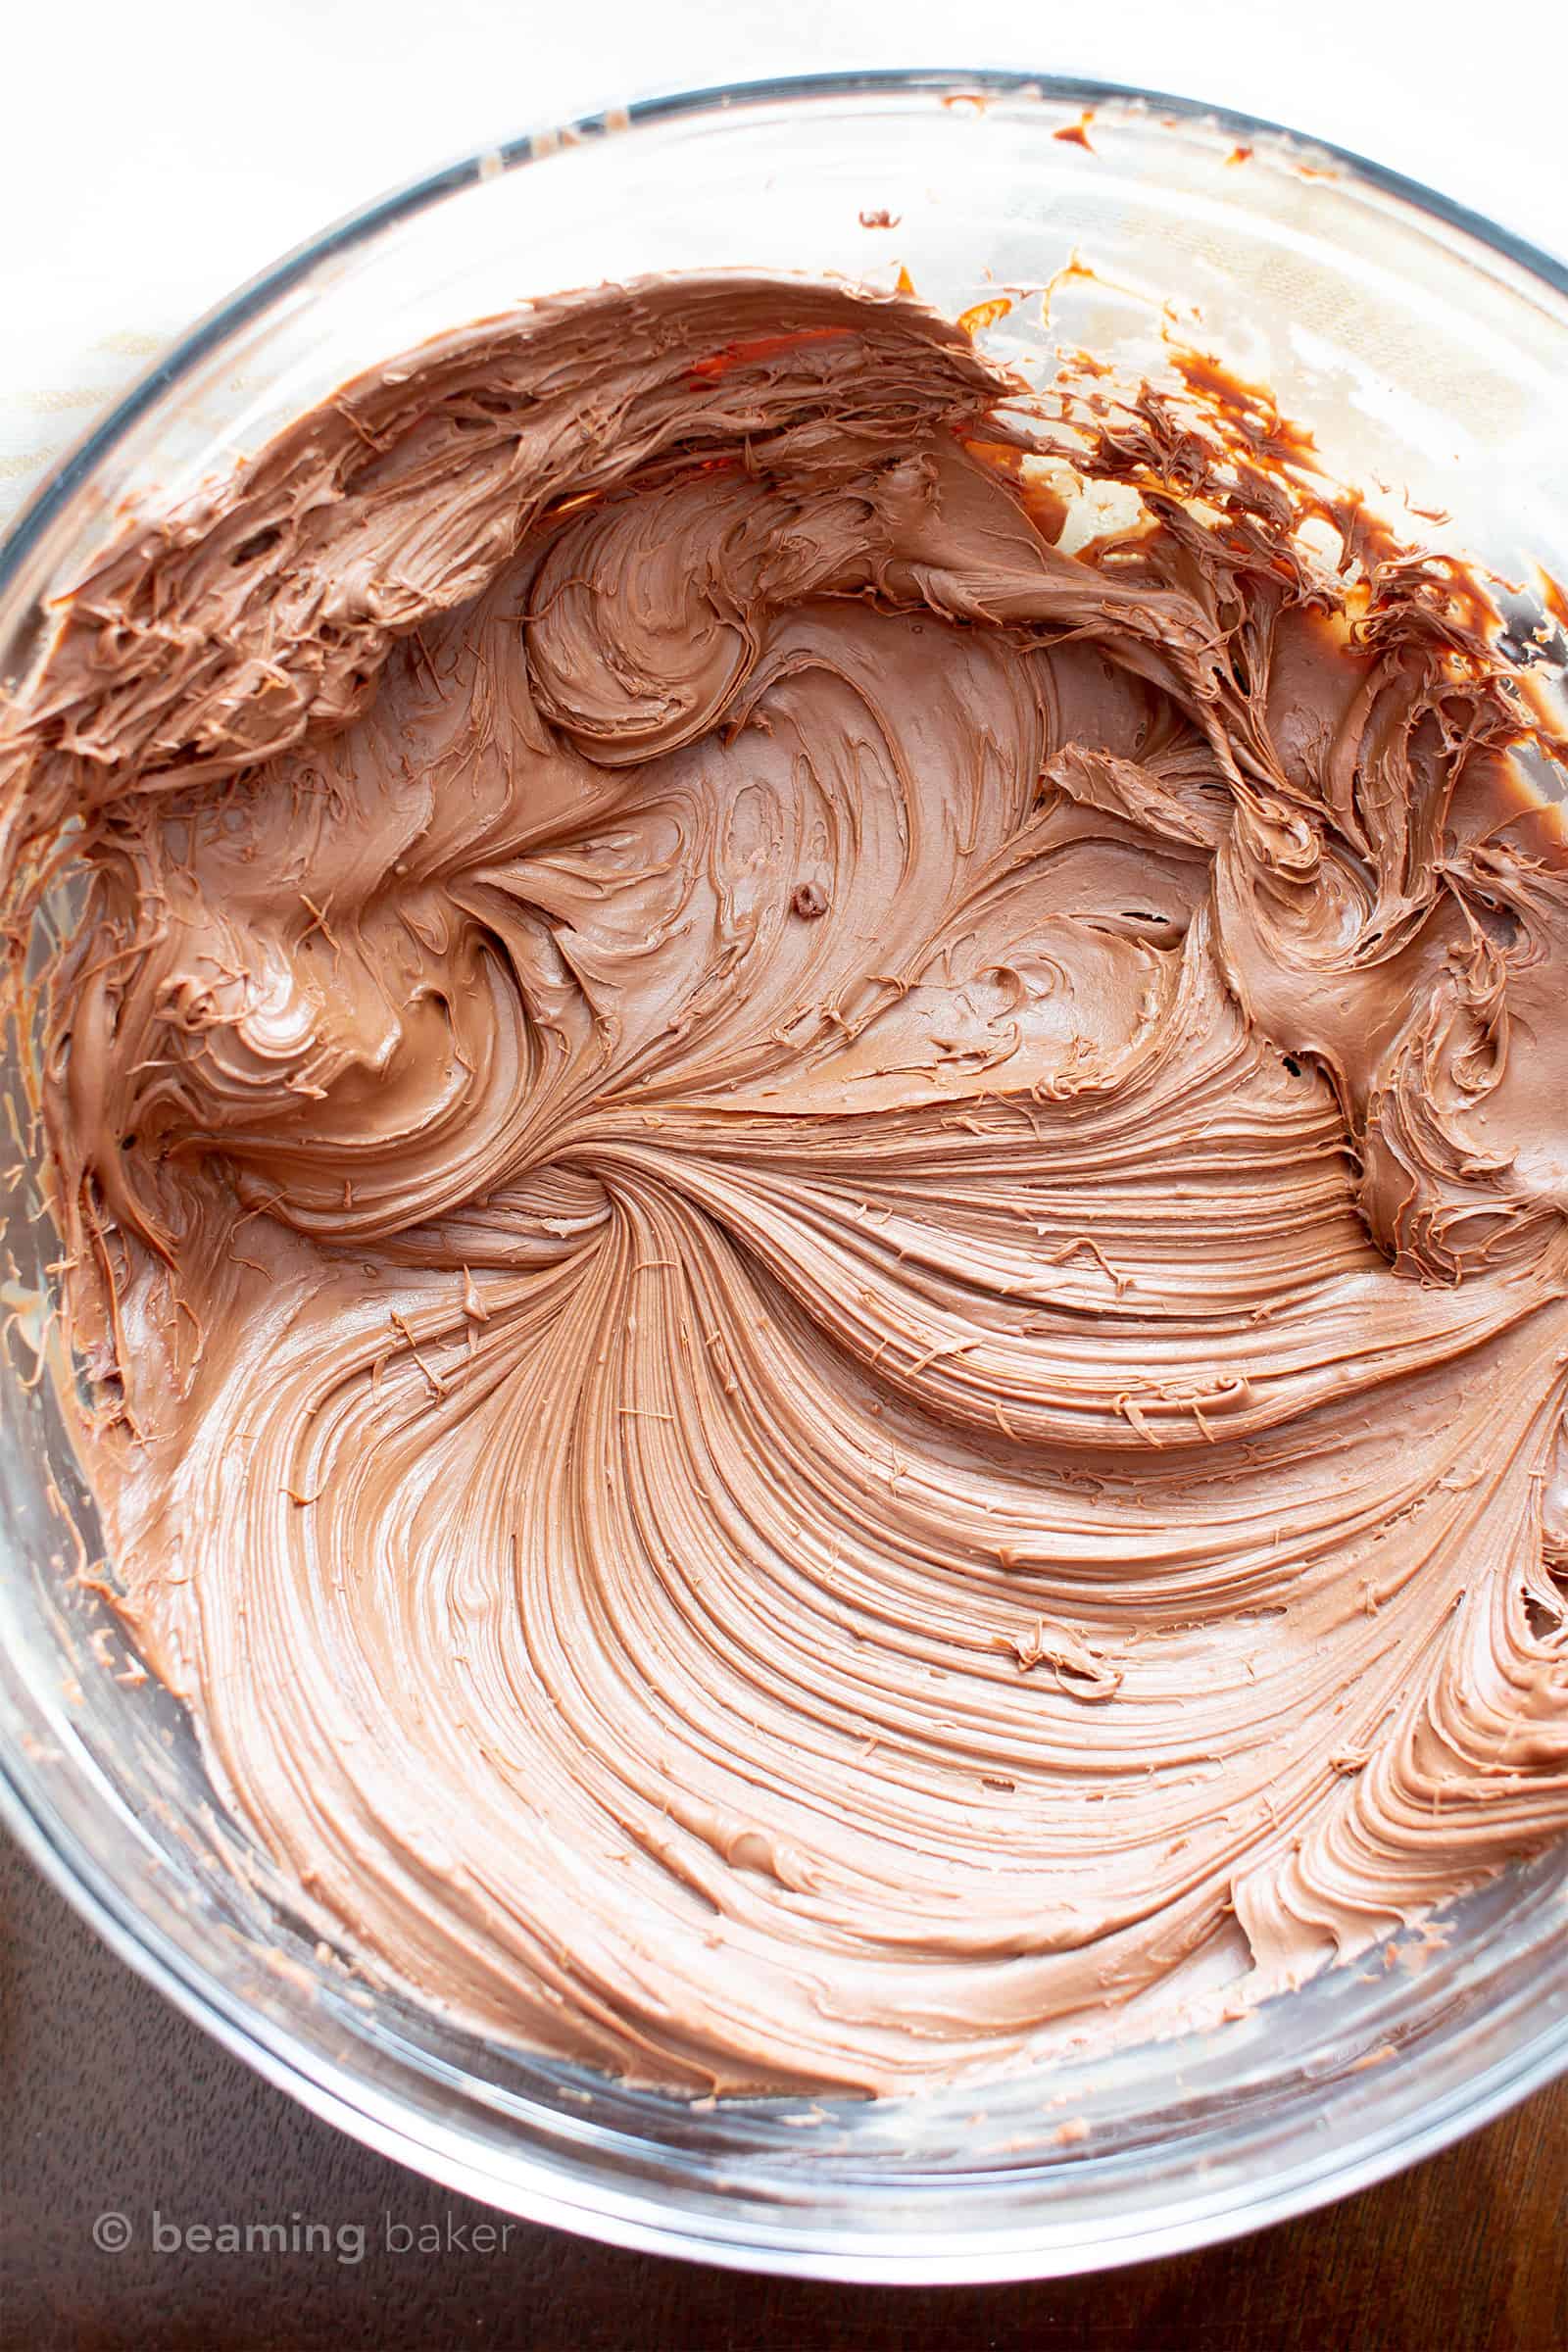 Vegan Chocolate Frosting: smooth ‘n creamy vegan chocolate frosting that’s so easy to pipe. Just 2 ingredients for the best dairy free frosting! #Vegan #ChocolateFrosting #VeganFrosting #DairyFree | Recipe at BeamingBaker.com